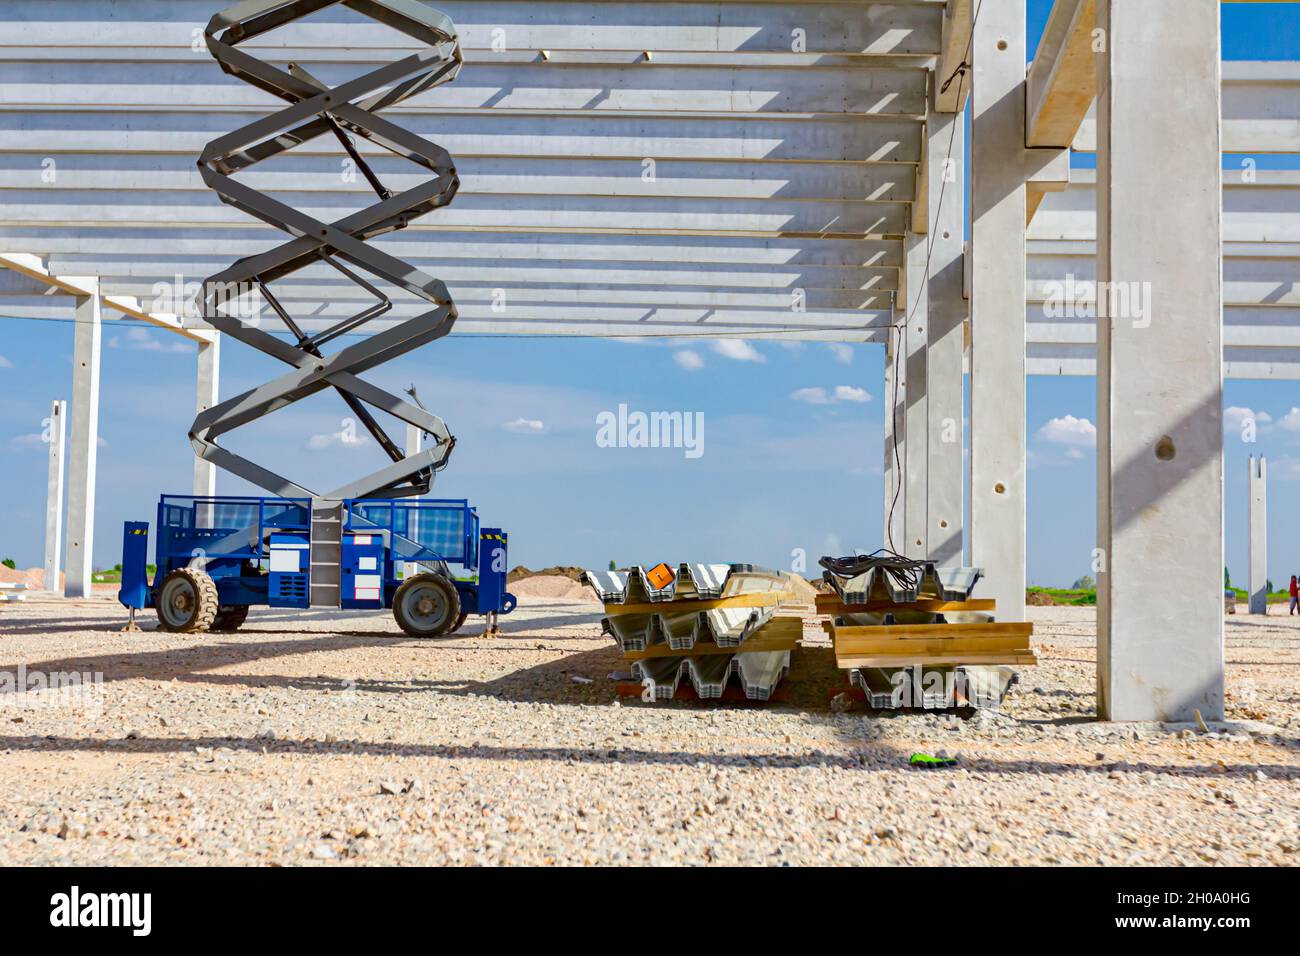 Scissor lift platform with stretched hydraulic system at maximum height range under building skeleton. Stock Photo